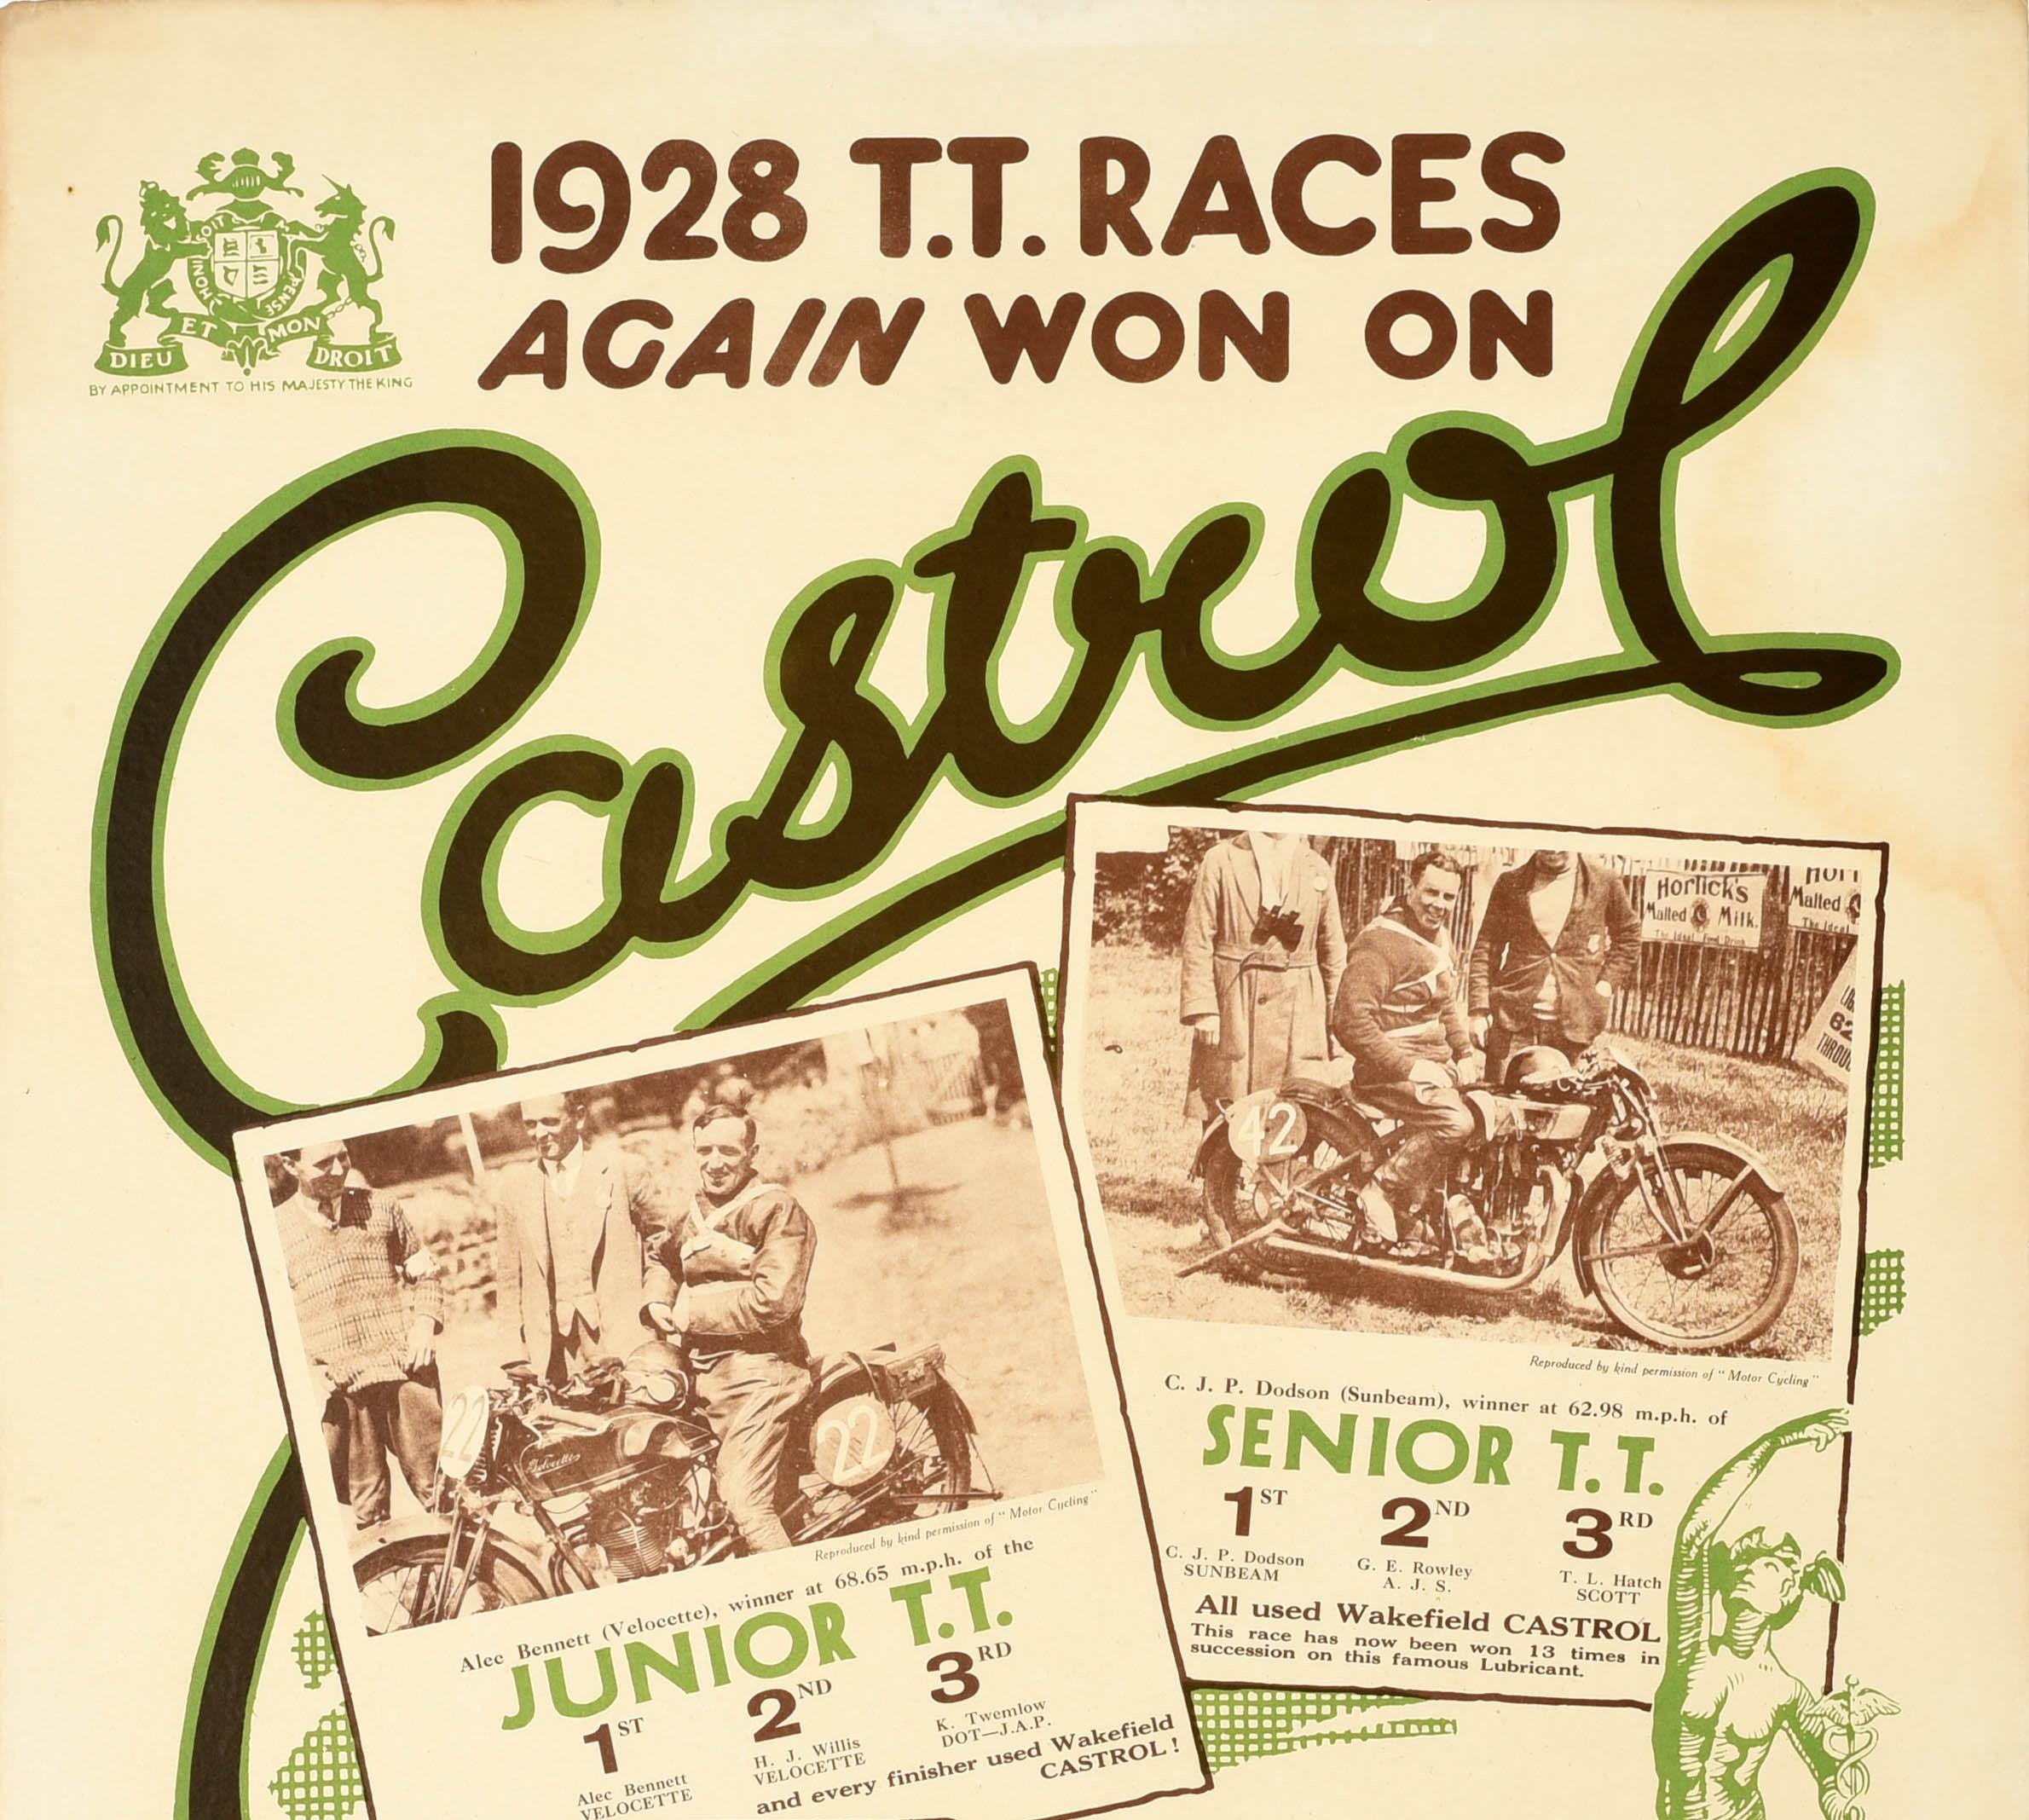 Original vintage motorsport advertising poster for Castrol Motor Oil - 1928 T.T. Races again won on Castrol - featuring the title in bold stylised lettering above, the swoop of the letter L running behind photograph images and description of the